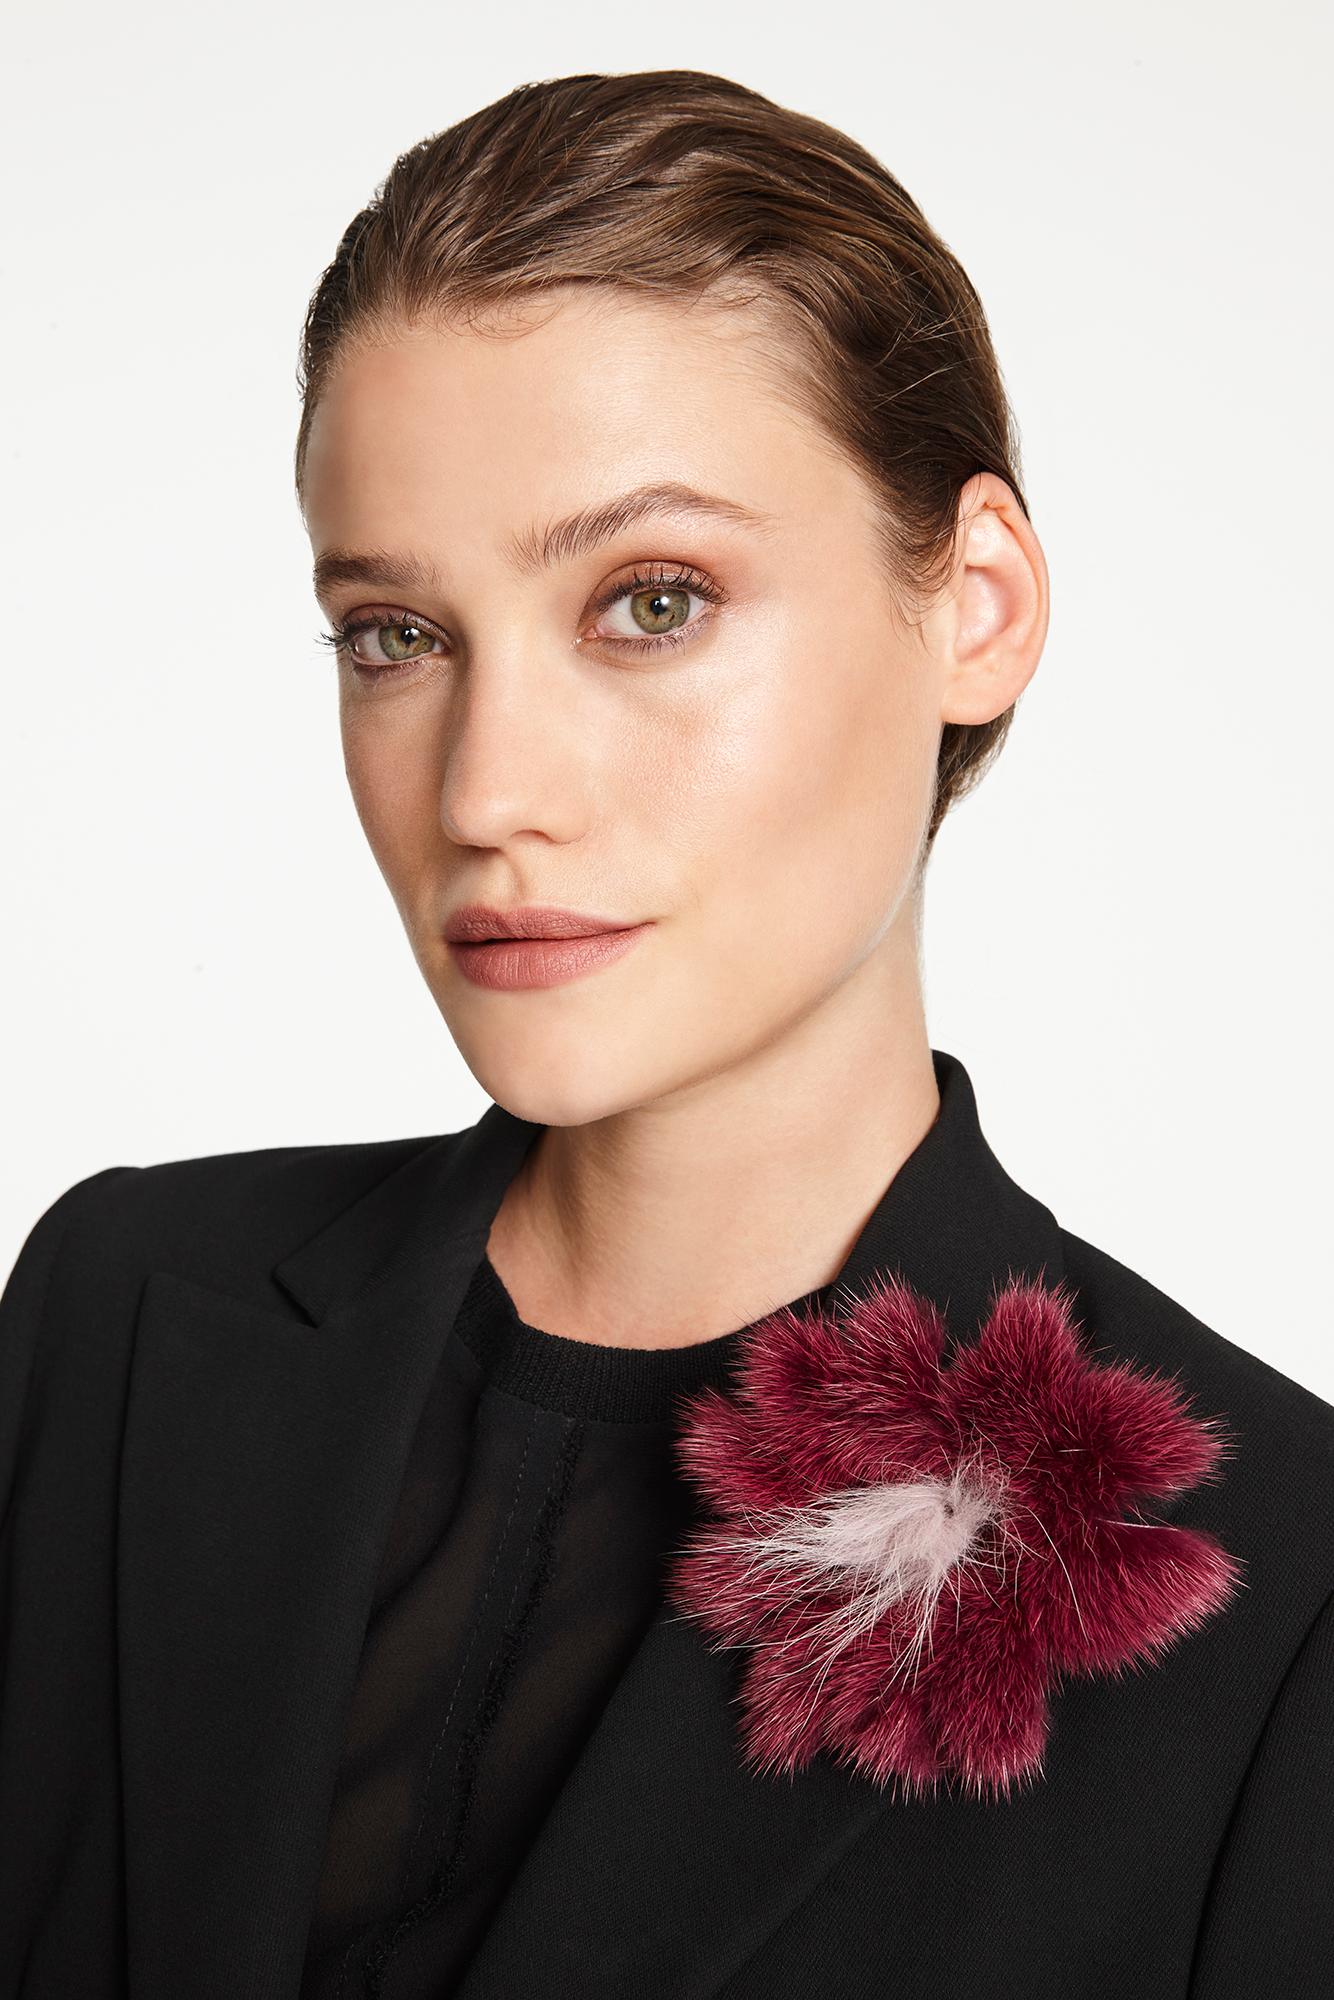 The perfect valentines gift, this Verheyen London mink fur flower brooch is designed to add a glimmer of warmth and fun to your look.  Wear on your favourite winter knit or over a cape for glamour.

PRODUCT DETAILS

Colour: Berry Burgundy
Material: